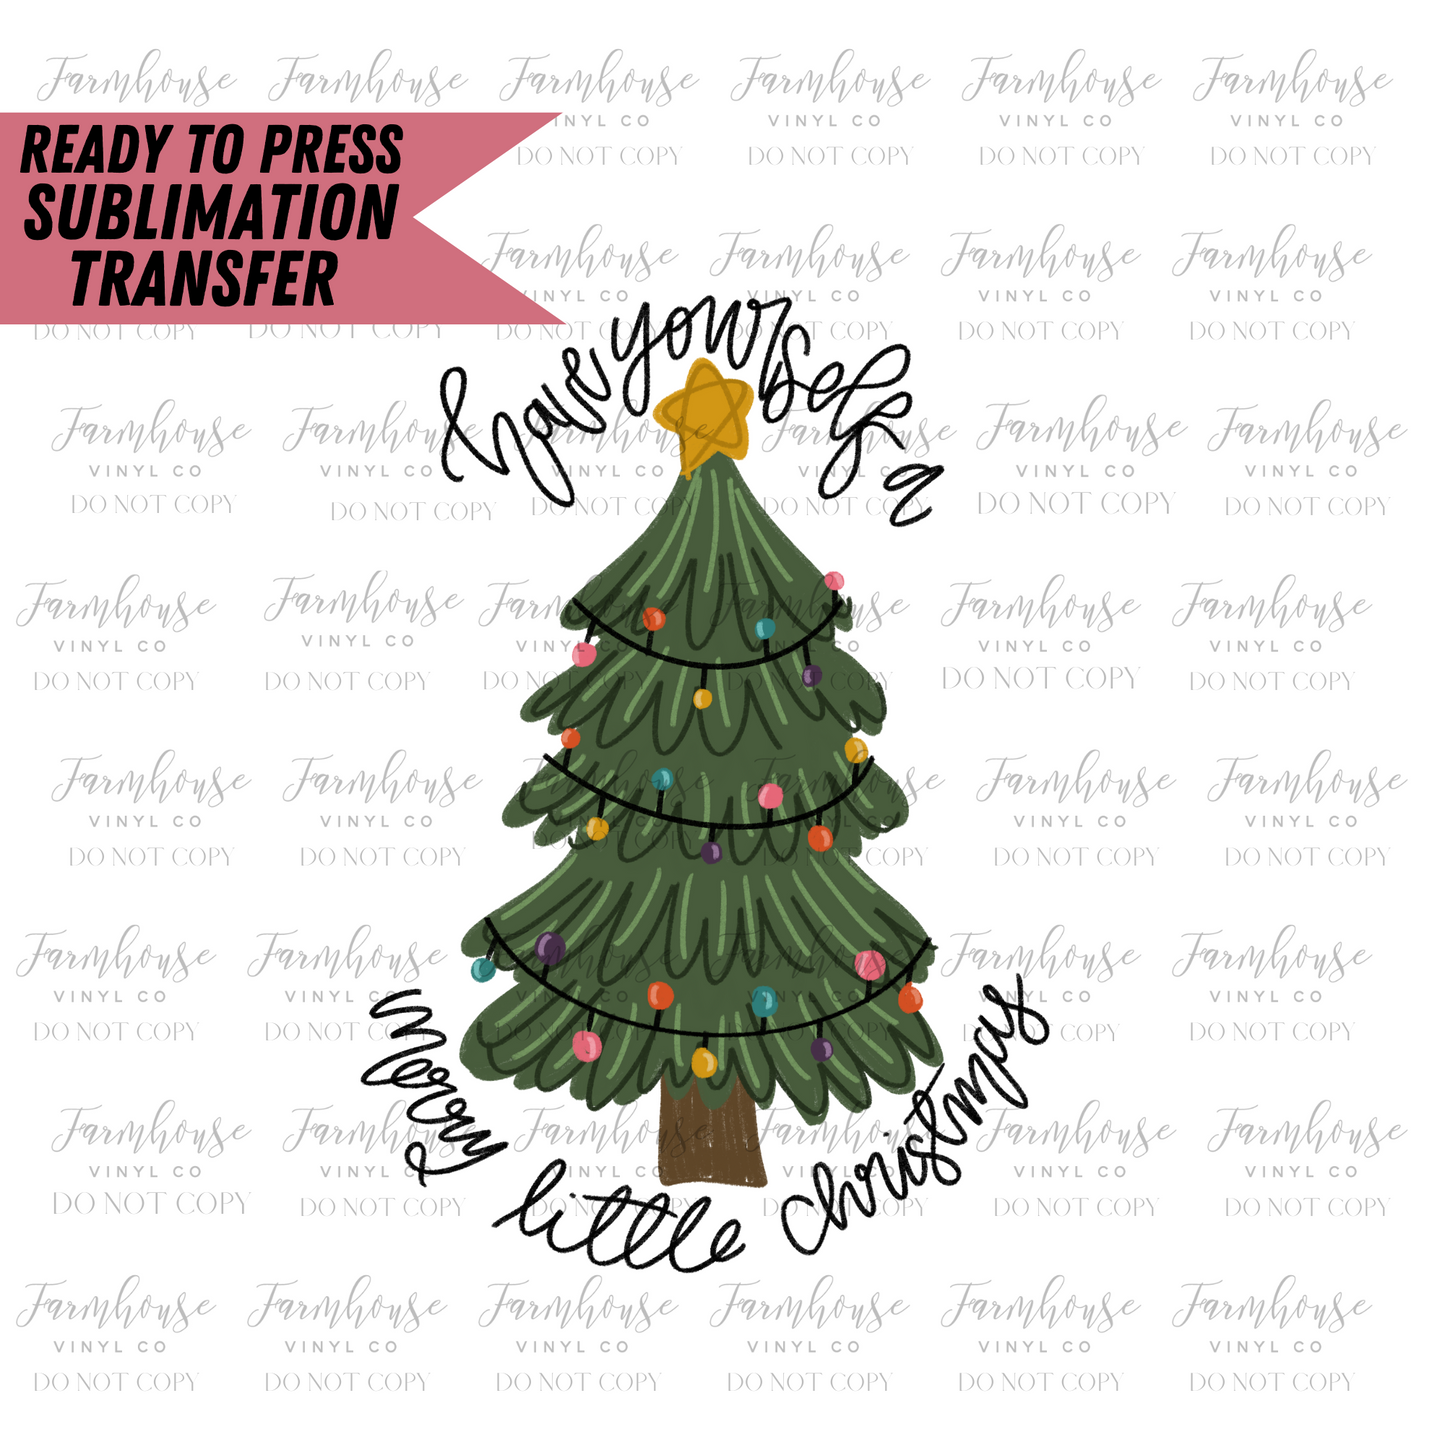 Have Yourself A Merry Little Christmas Ready To Press Sublimation Transfer - Farmhouse Vinyl Co